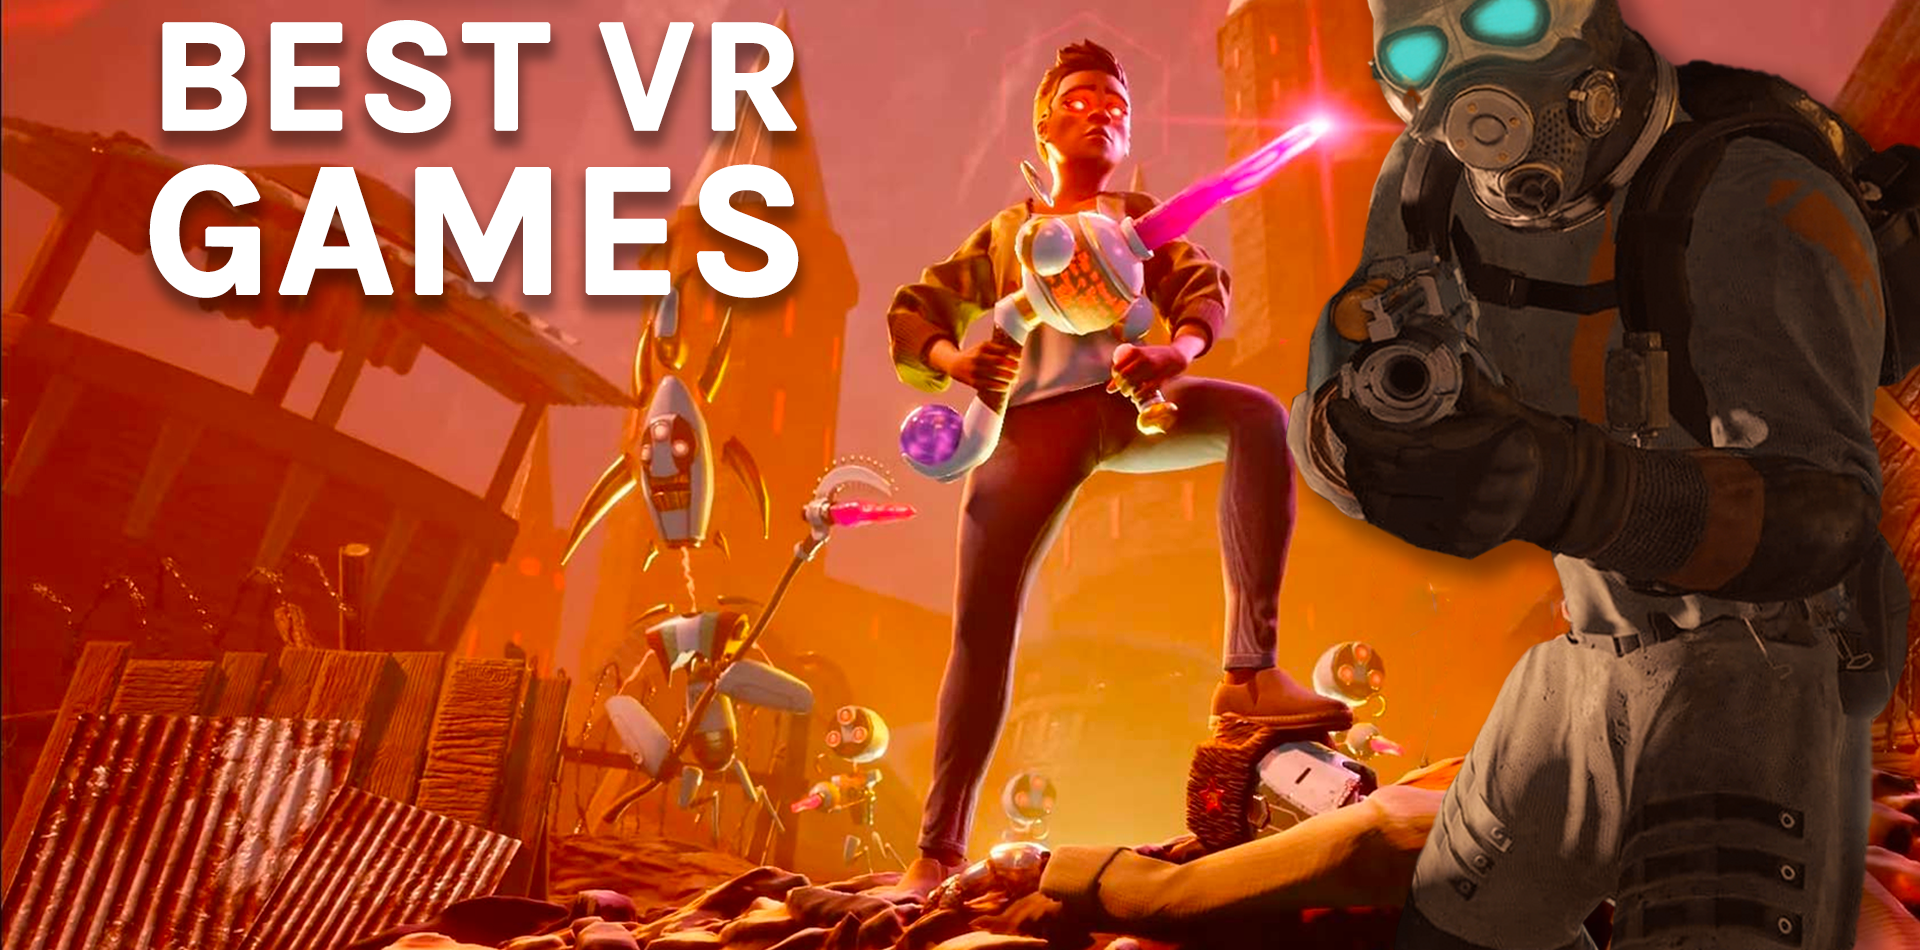 Free VR games that will blow your mind